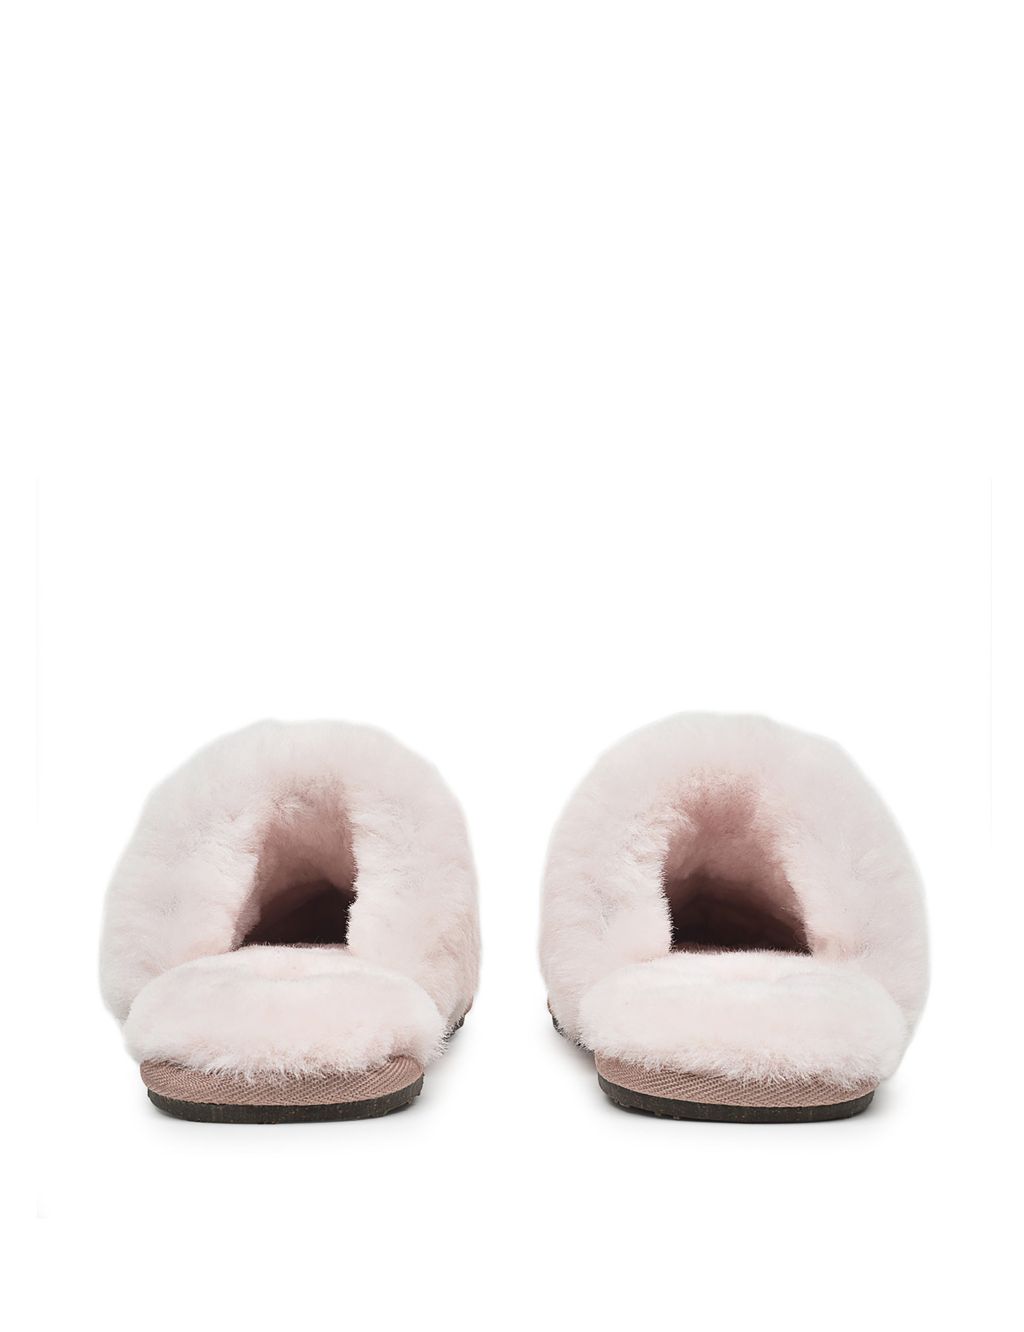 Suede Shearling Mule Slippers image 2